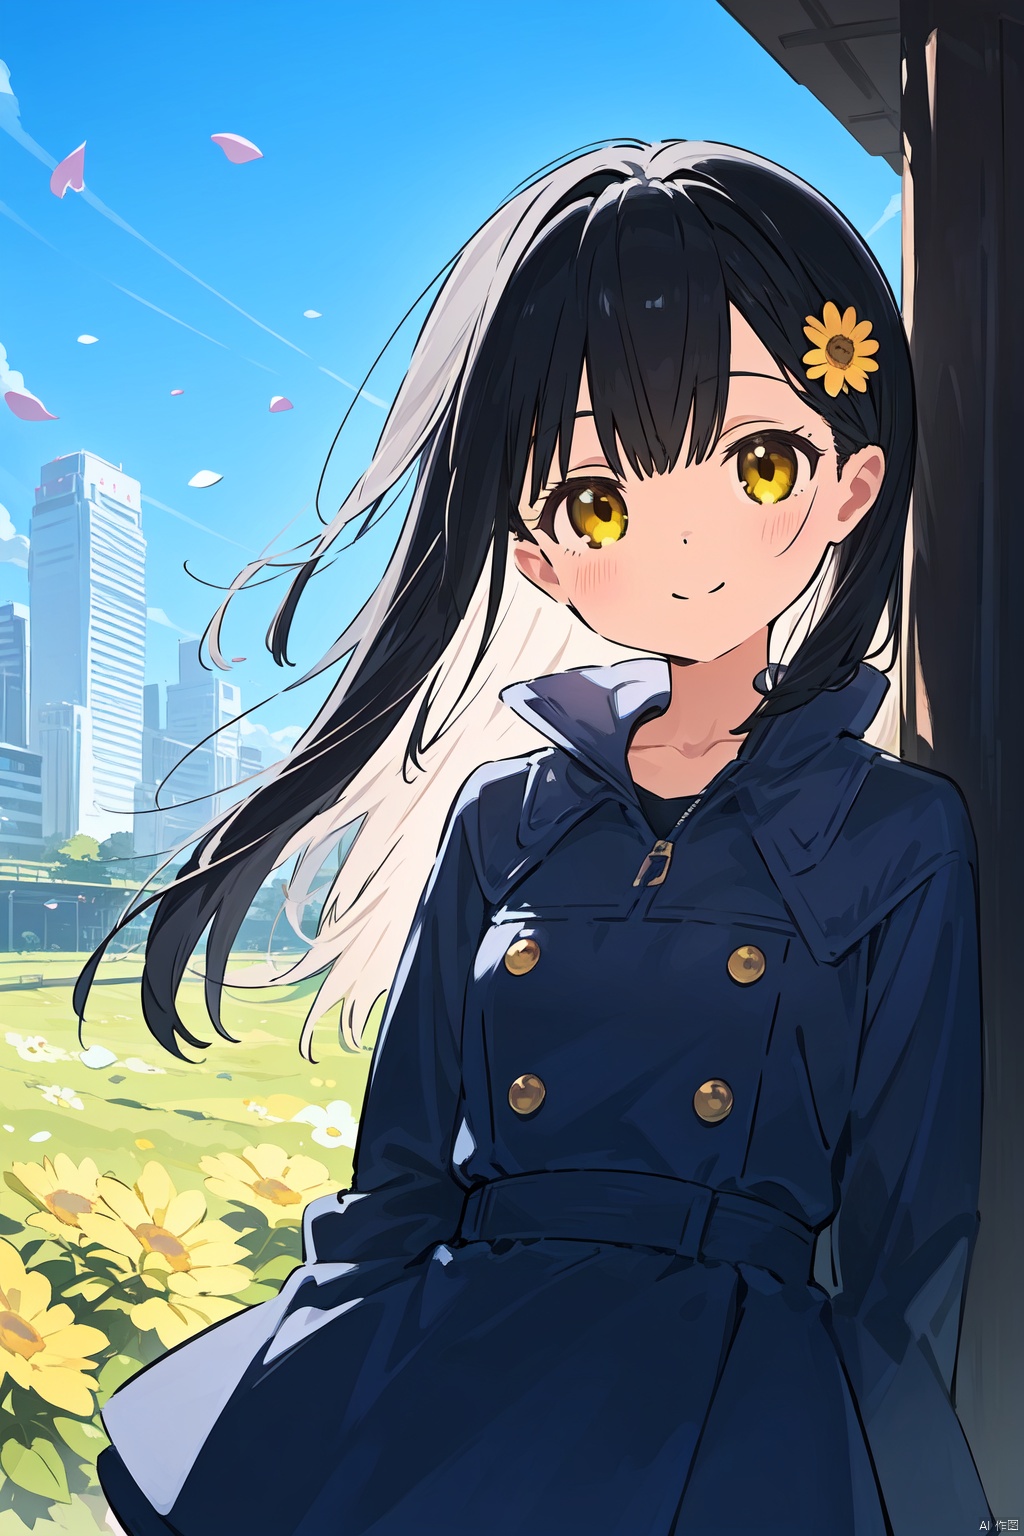 1girl, architecture, bangs, black_hair, blue_sky, blush, bouquet, breasts, building, castle, cherry_blossoms, city, cityscape, cloud, cloudy_sky, collarbone, confetti, daisy, day, falling_petals, fence, ferris_wheel, field, flower, flower_field, hair_ornament, hairclip, holding, holding_flower, house, jacket, leaves_in_wind, long_hair, long_sleeves, looking_at_viewer, open_clothes, open_jacket, outdoors, petals, rose_petals, sky, skyline, skyscraper, smile, solo, sunflower, tower, upper_body, wind, windmill, yellow_flower